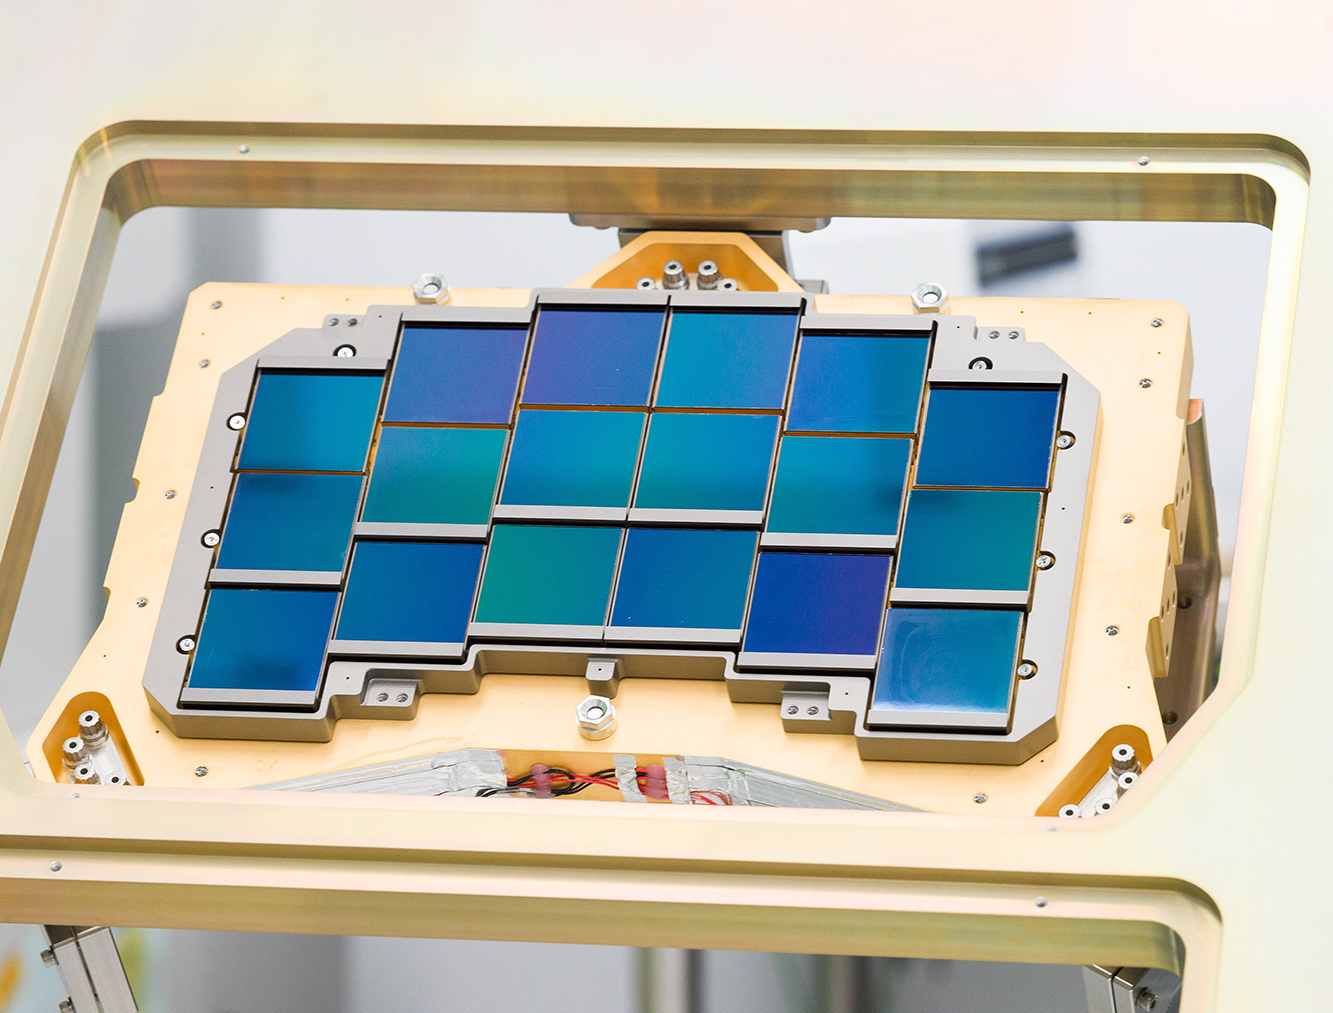 The Roman WFI detector focal plane consists of 18 H4RG-10 detectors in a 6 x 3 array that combined provide an 0.281 deg2 active FOV. This image shows the focal plane Engineering Test Unit with non-flight candidate detectors.